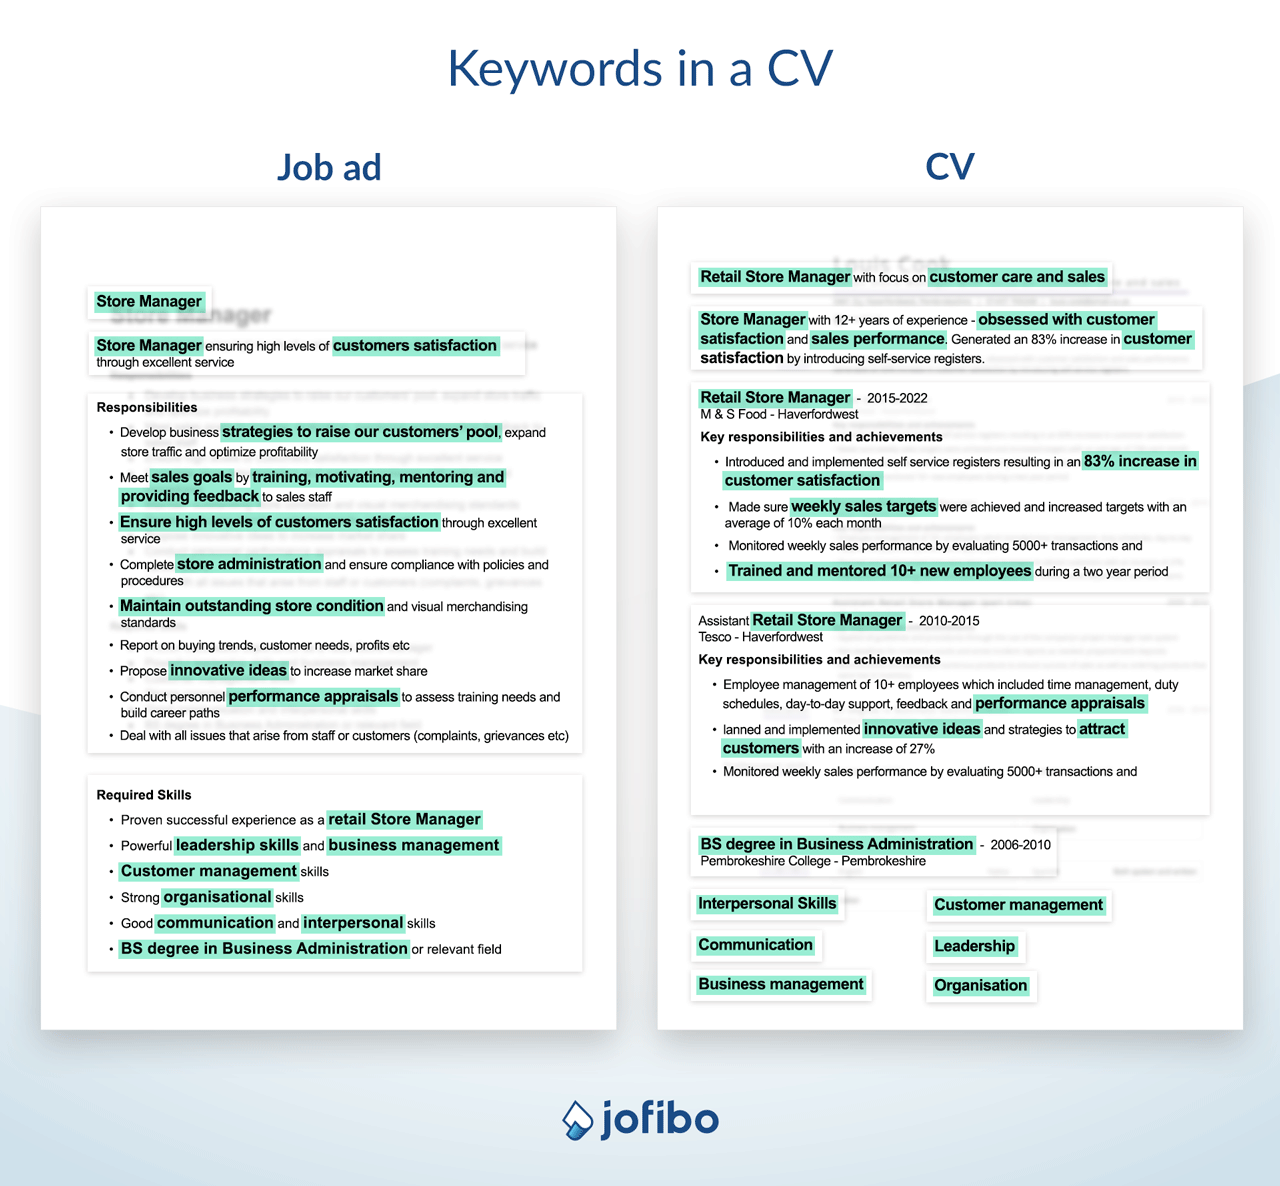 Illustration of how to add relevant keywords to your CV